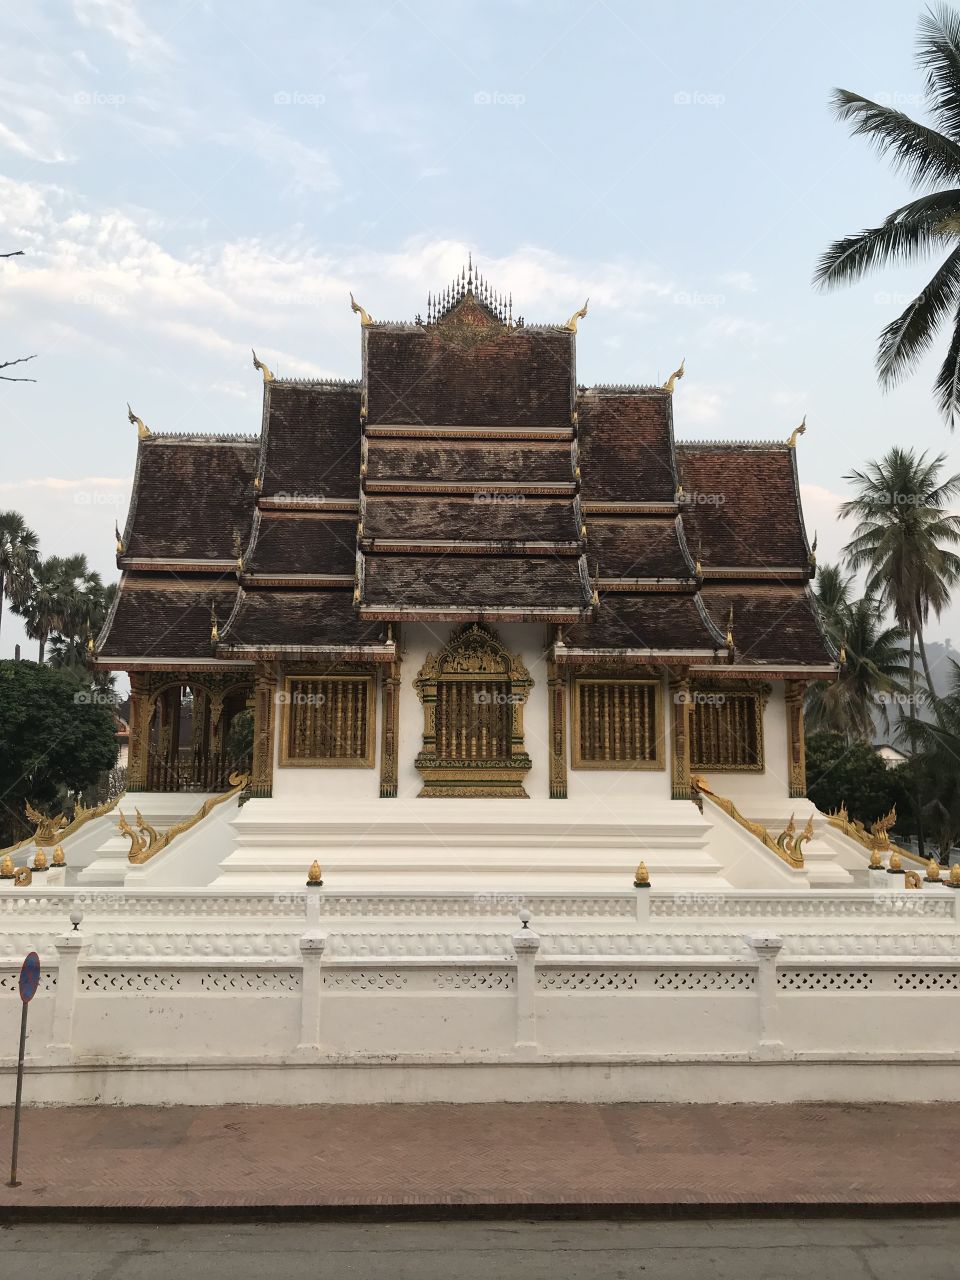 One of the temples in luang prabang 